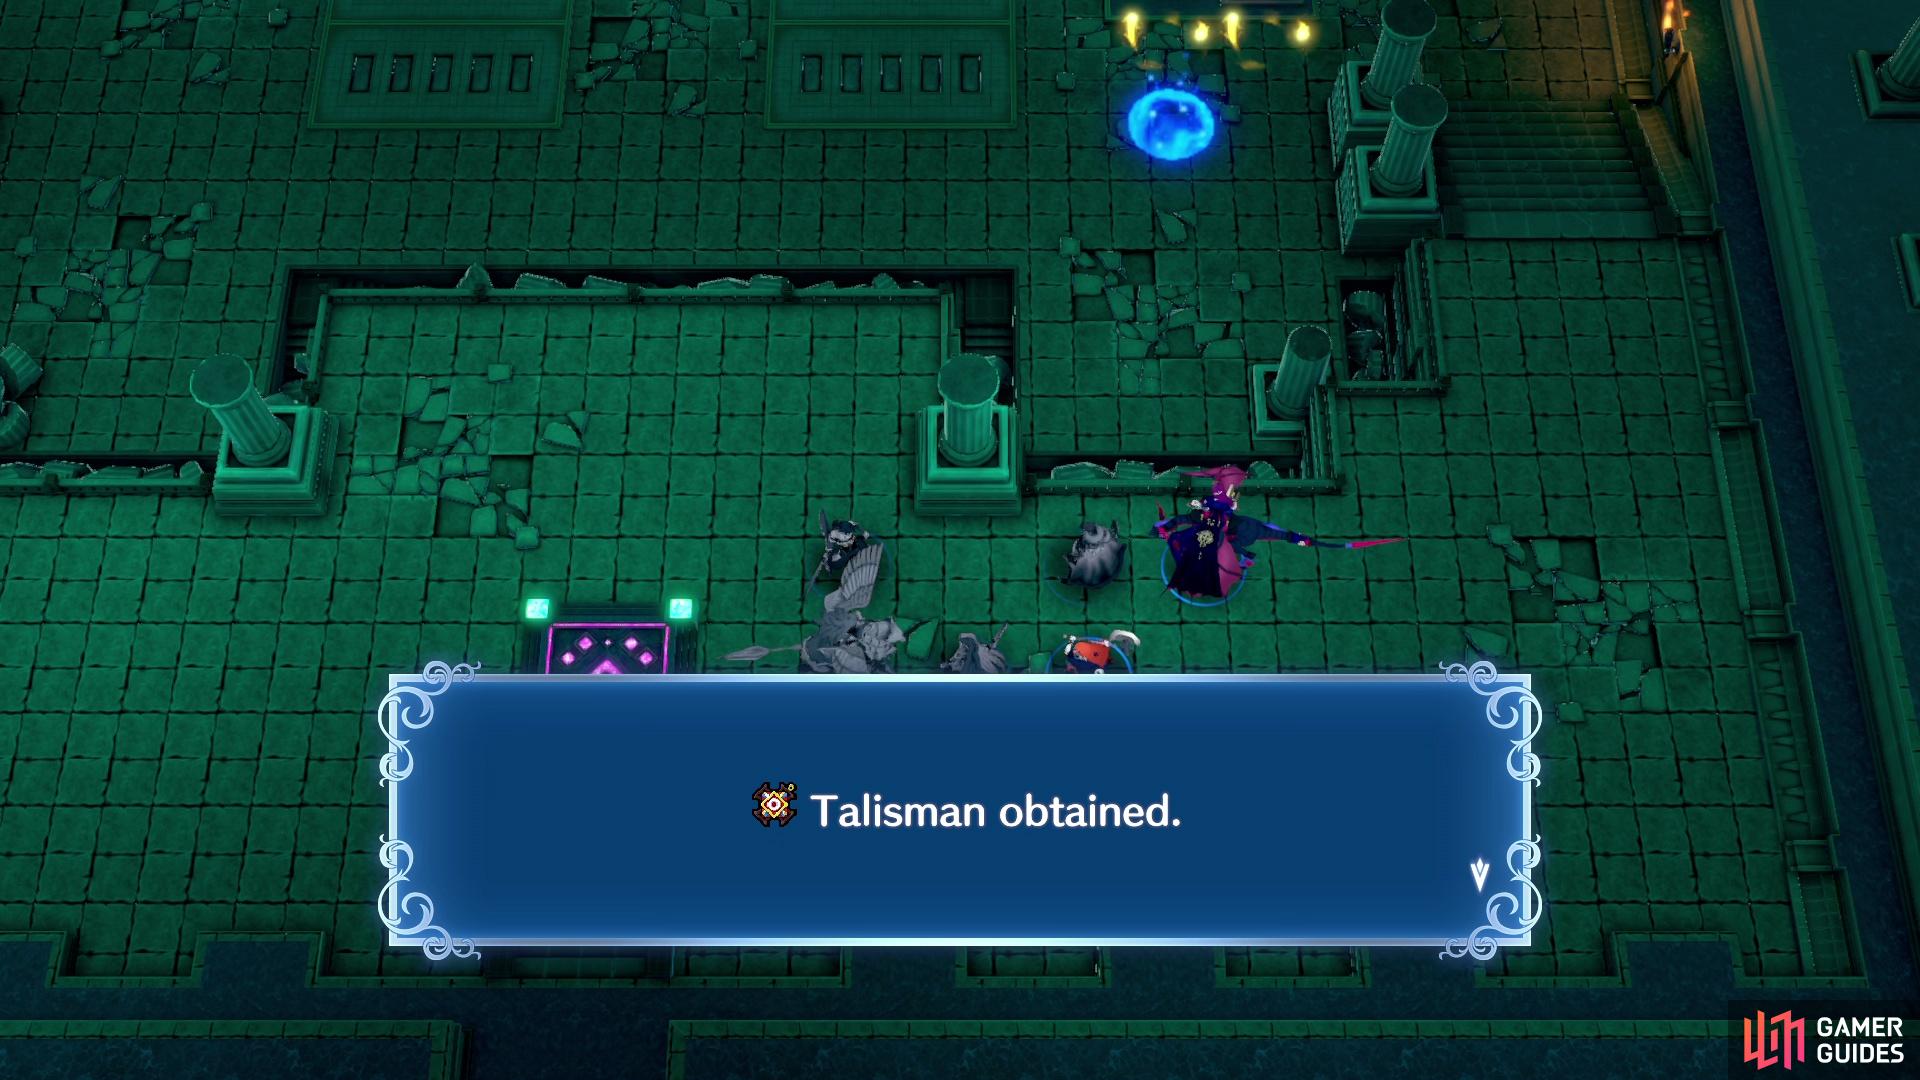 you will get a Talisman and an Elixir if you prevent too many crystals from being smashed.